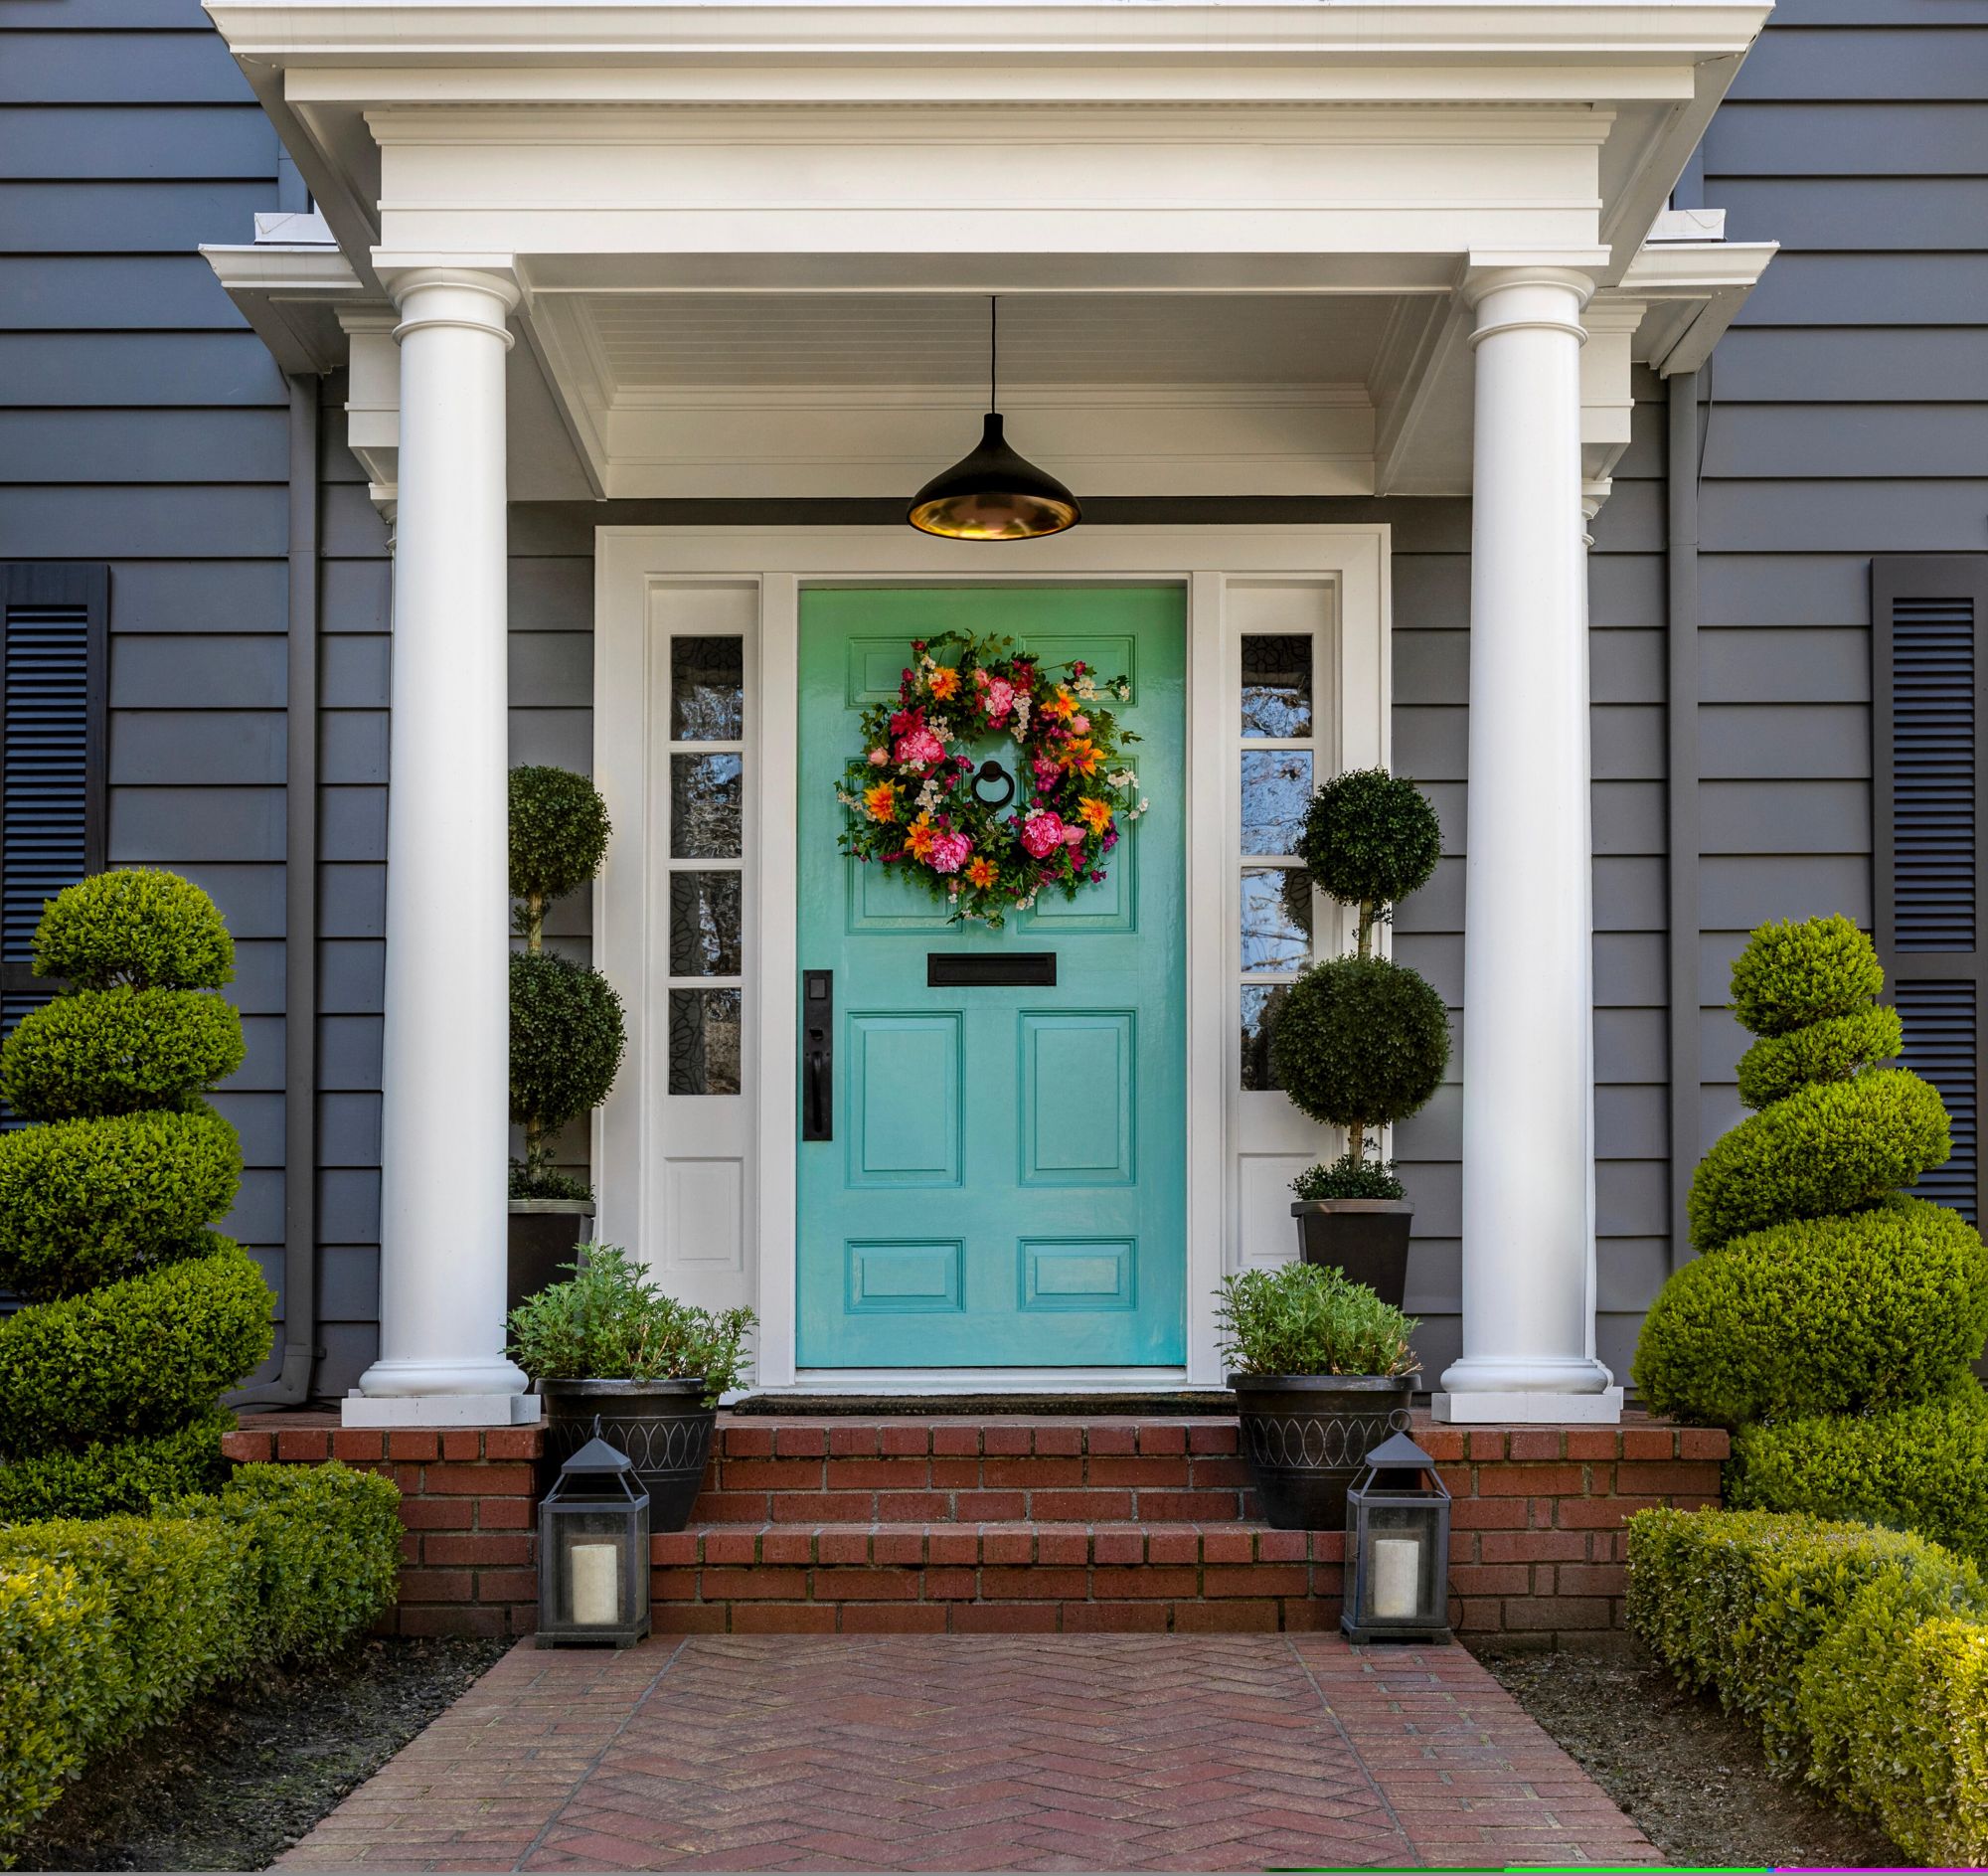 Teal entry door decorated with flower wreath